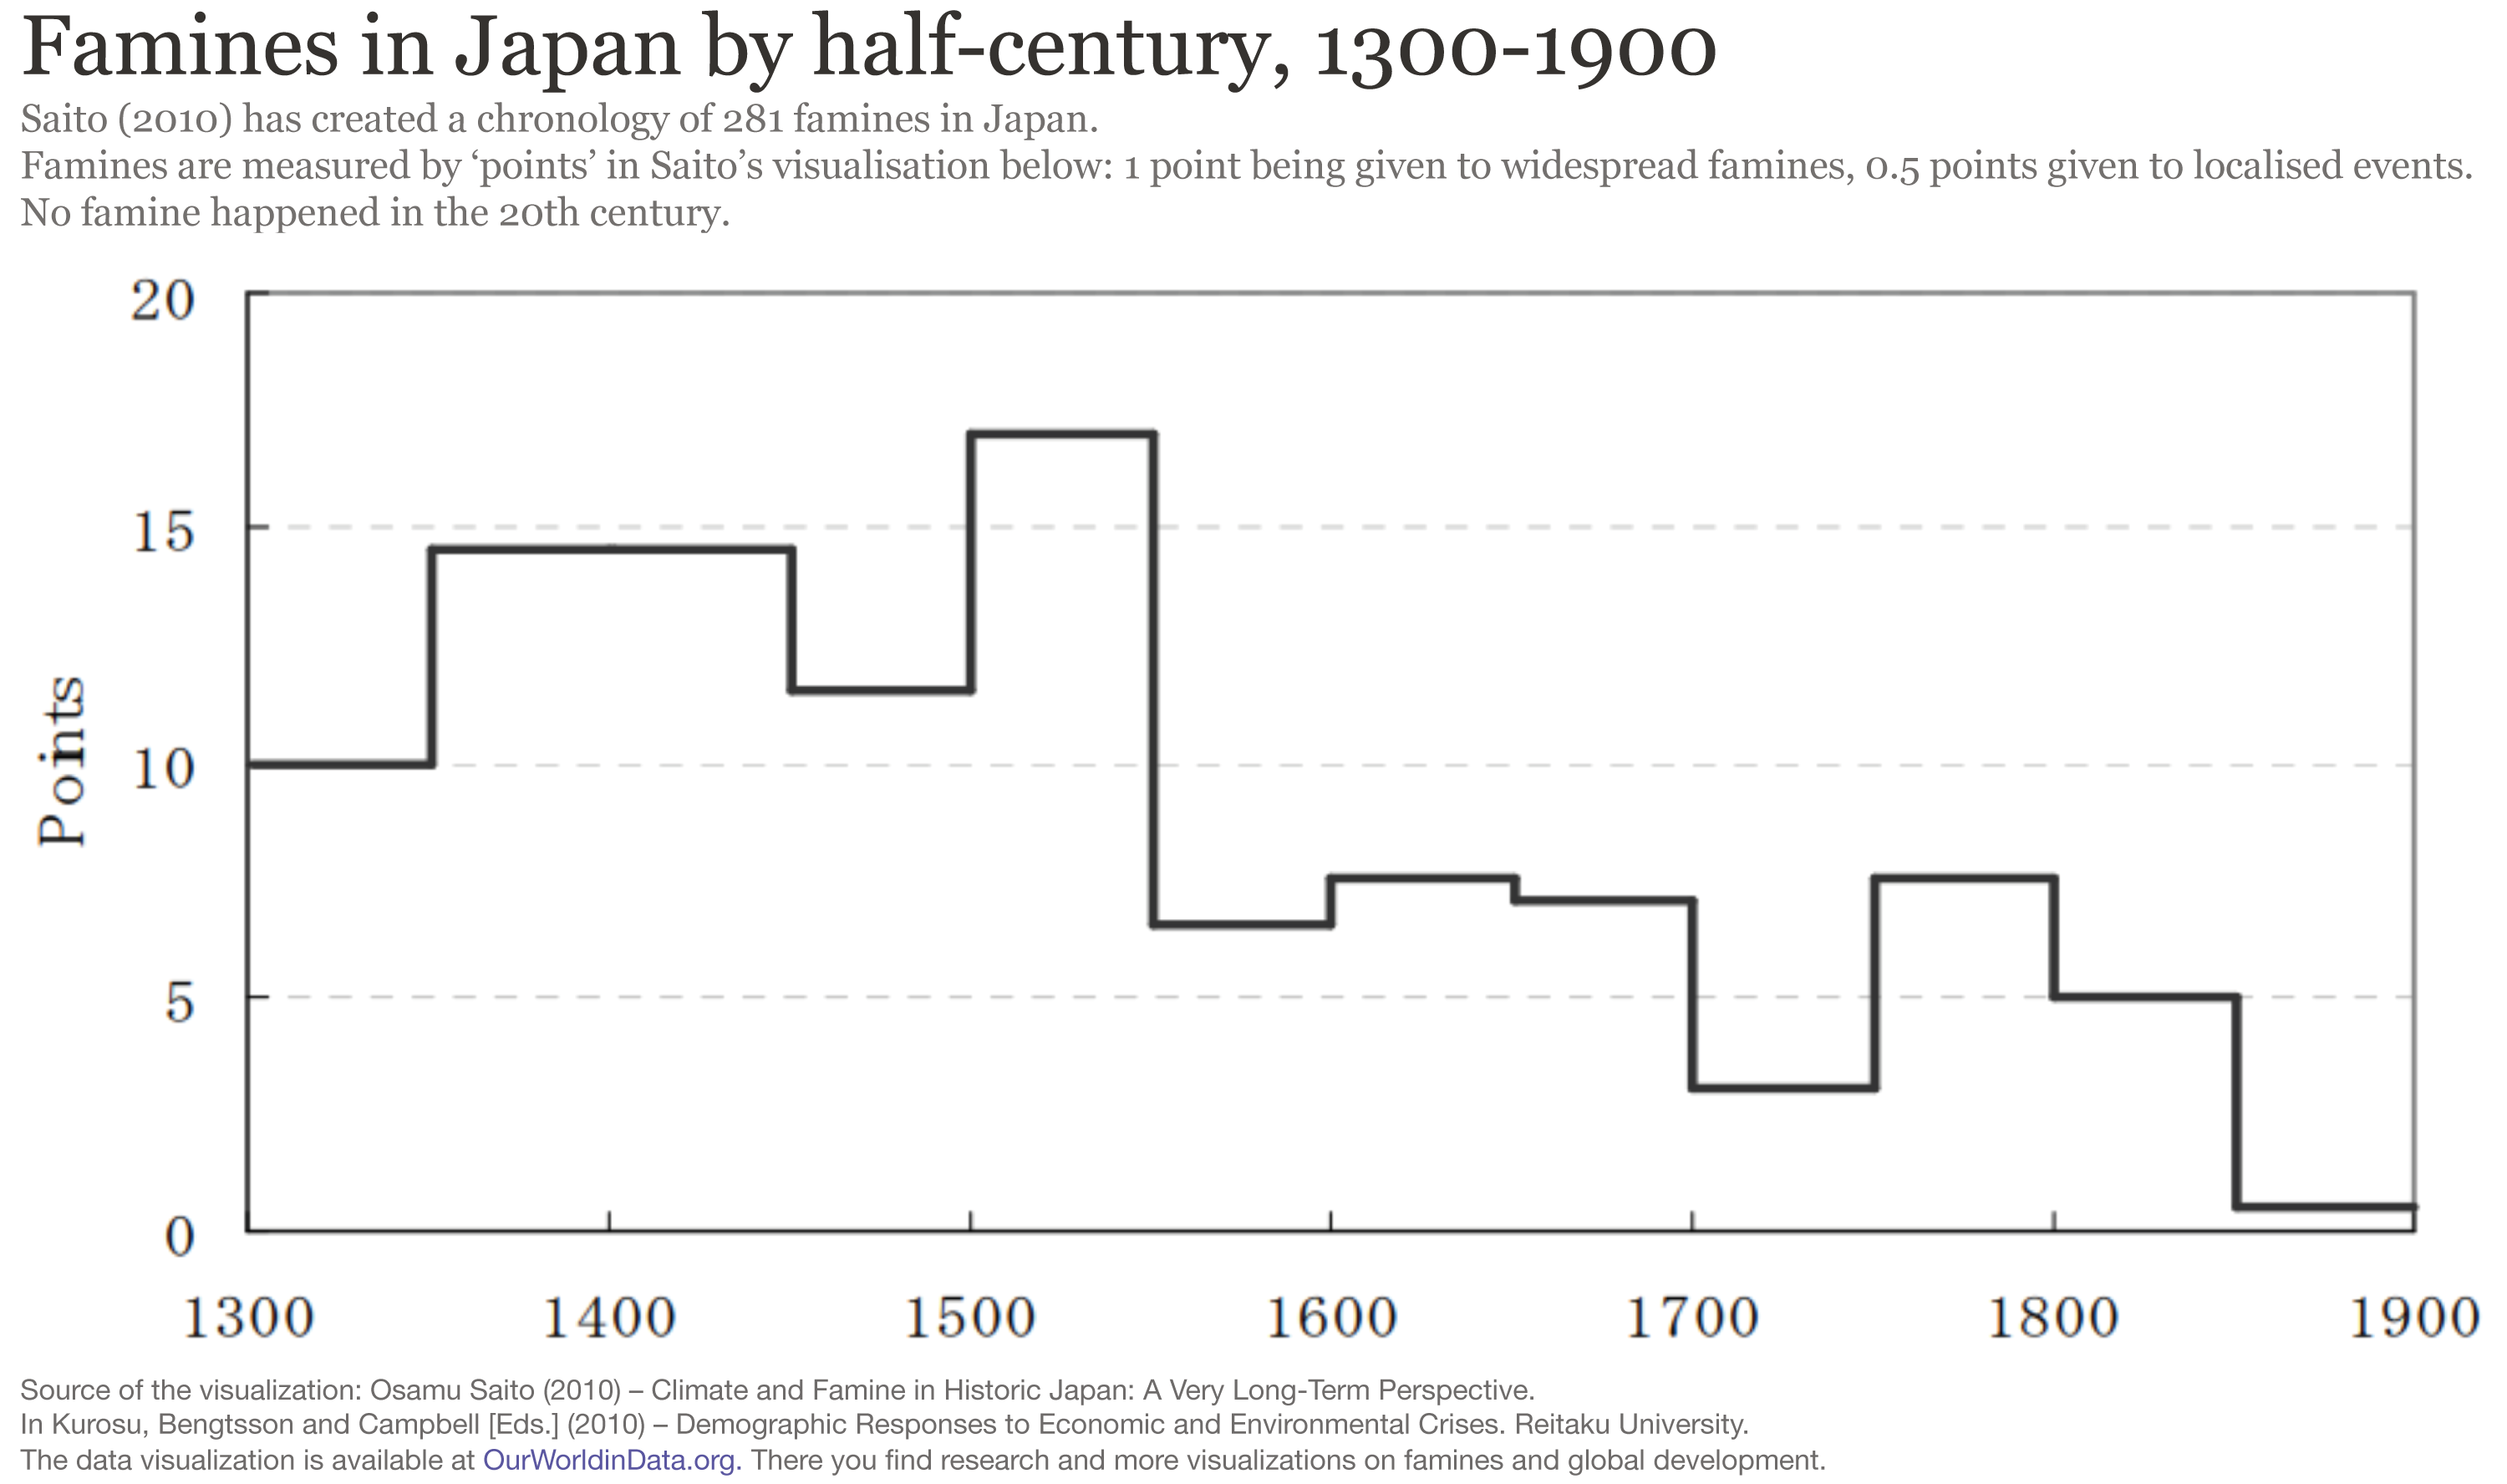 Famines in japan over the long run